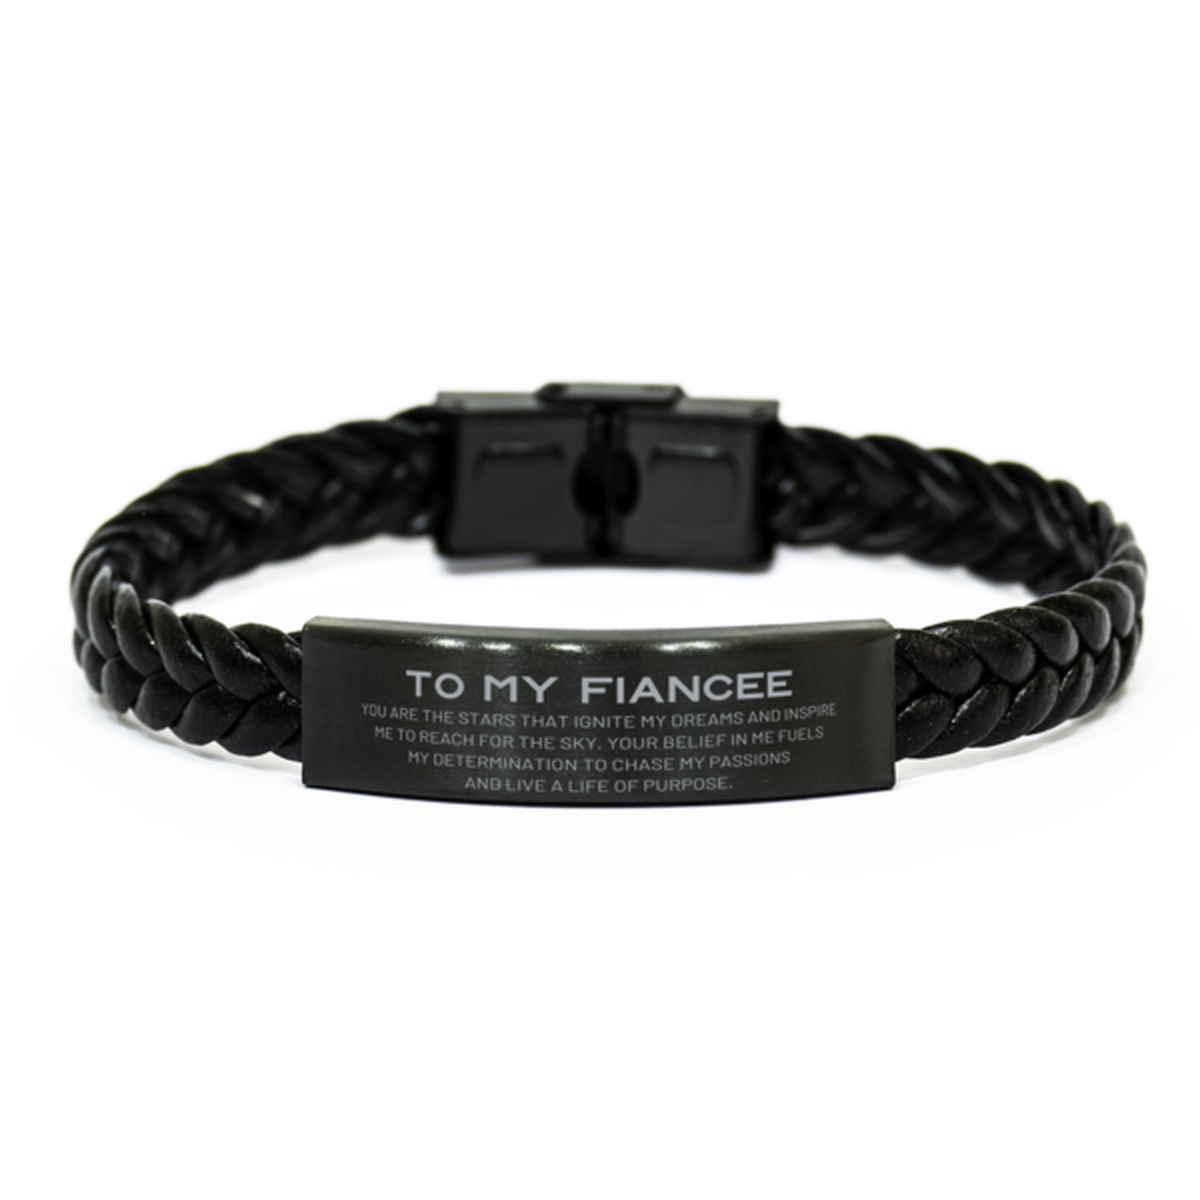 To My Fiancee Braided Leather Bracelet, You are the stars that ignite my dreams and inspire me to reach for the sky, Birthday Unique Gifts For Fiancee, Thank You Gifts For Fiancee